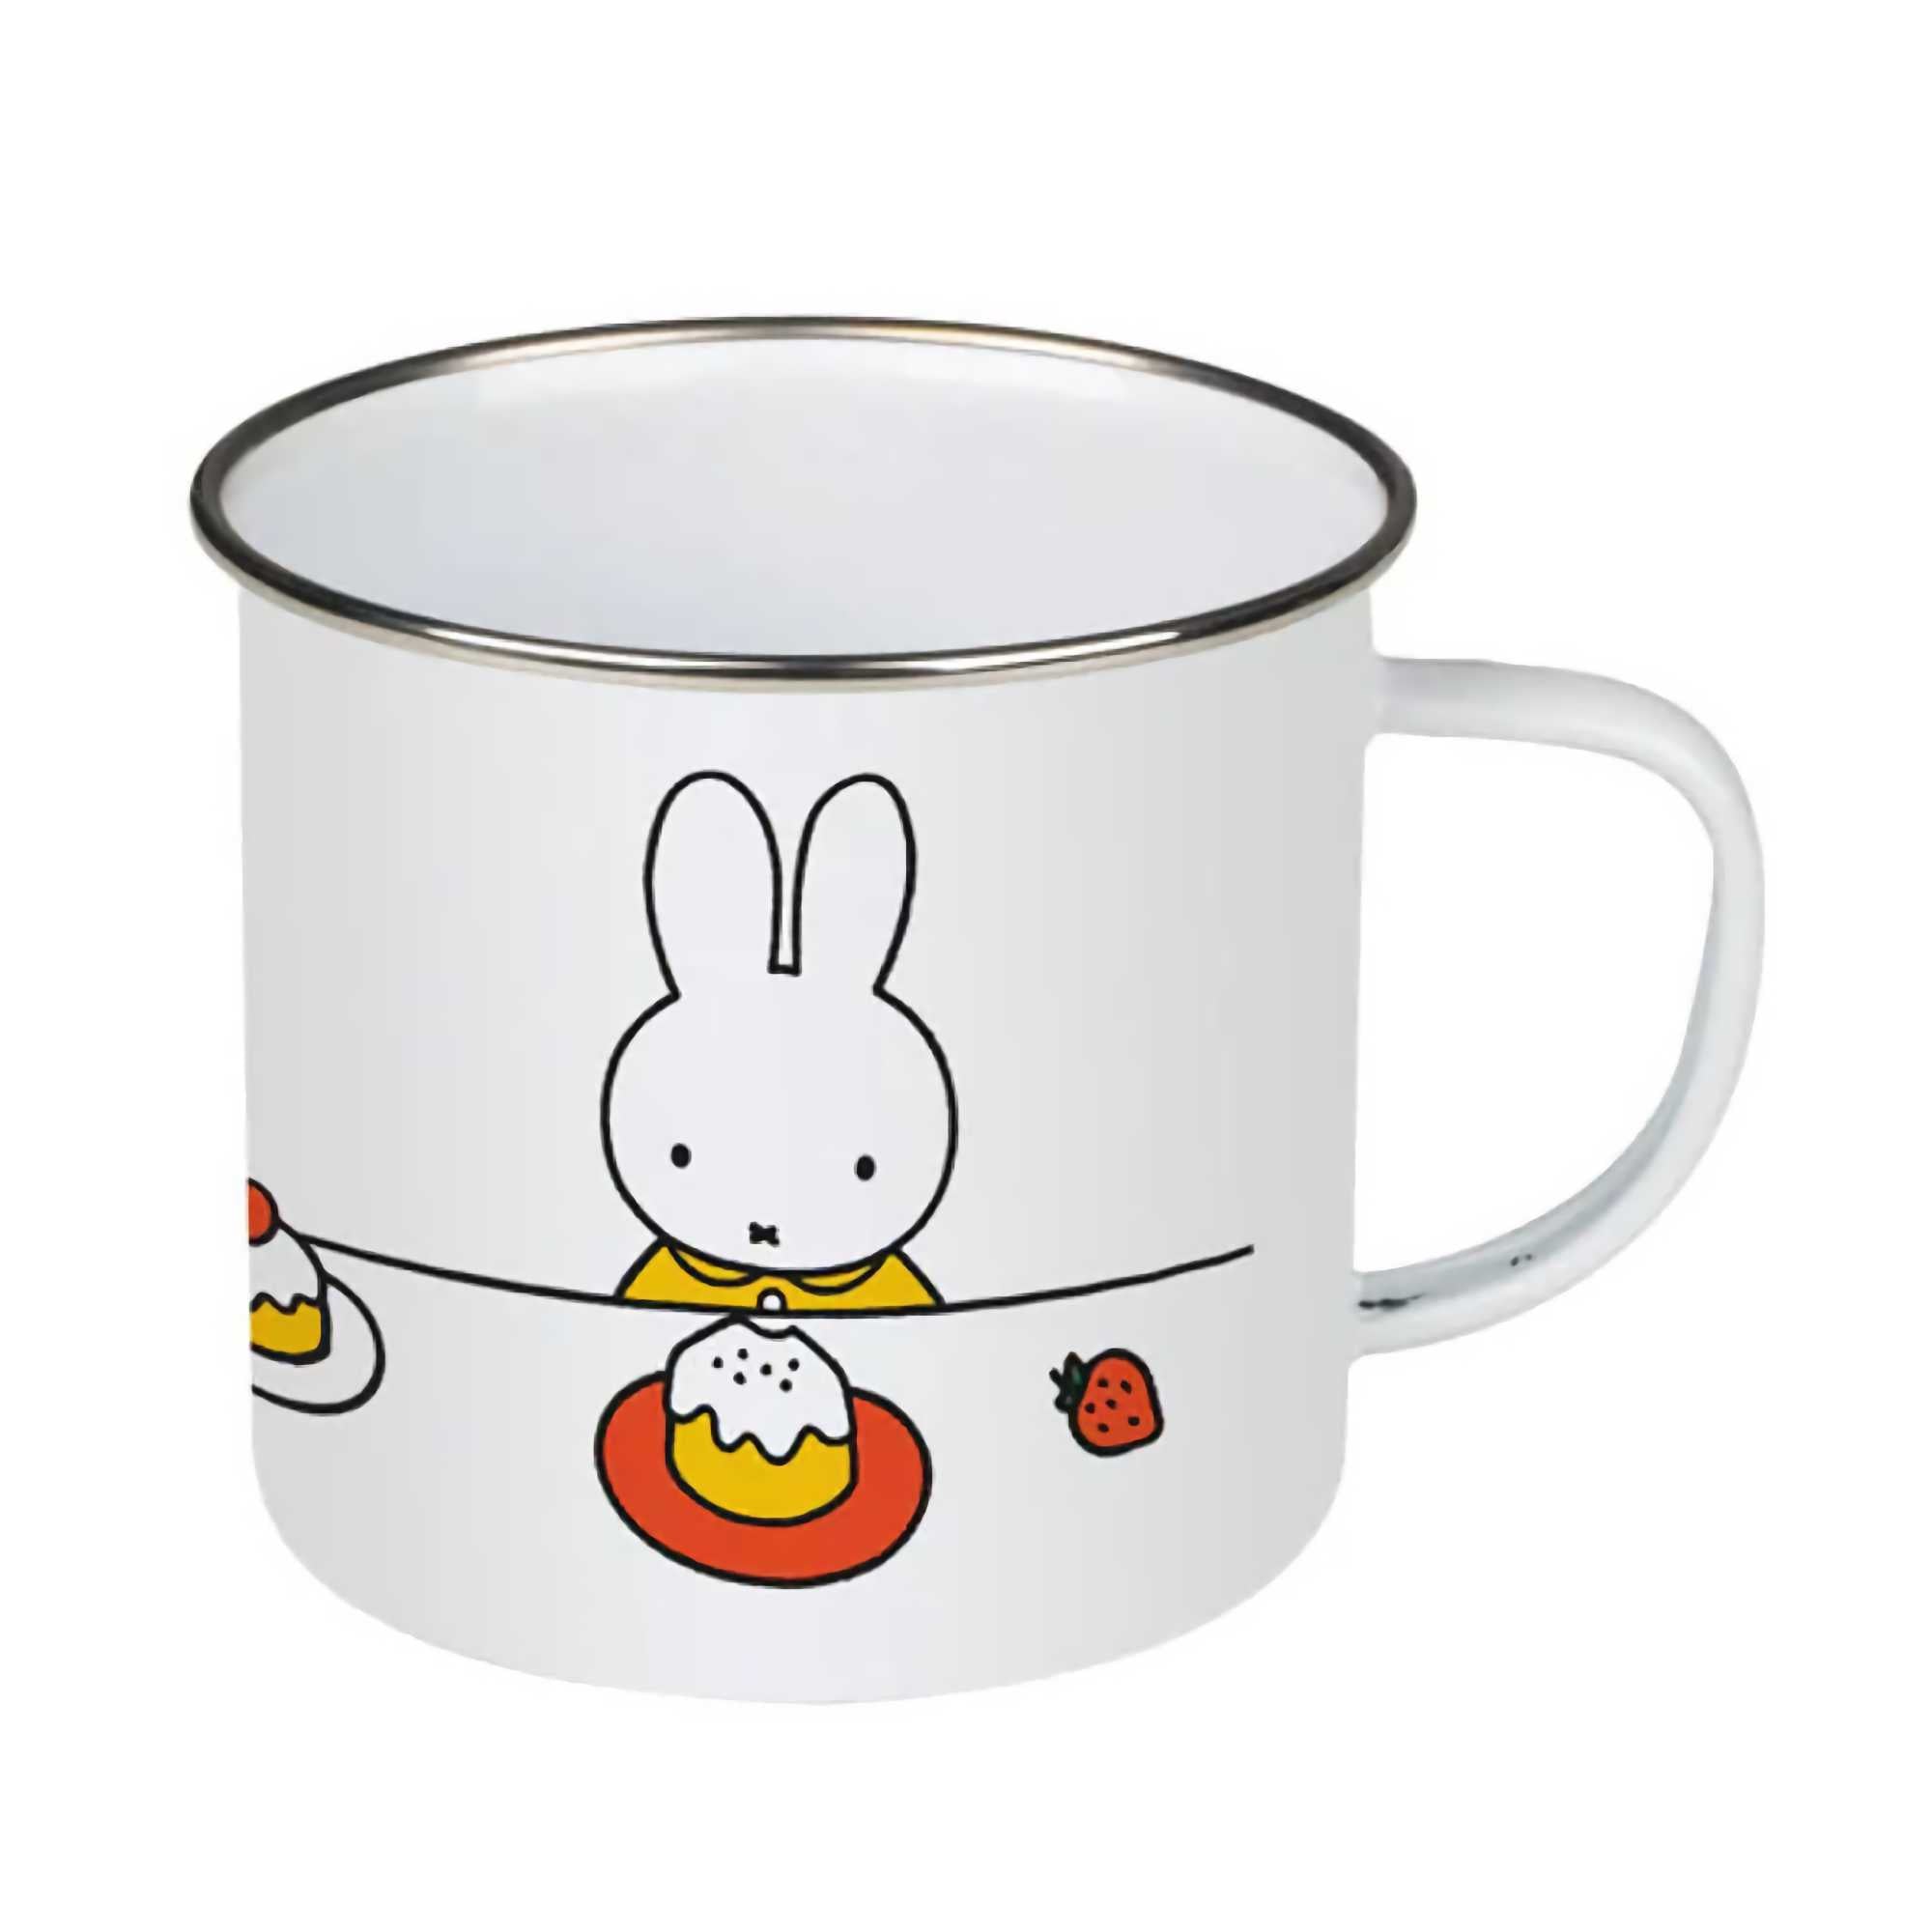 Star Editions Enamel Mug, Miffy With Her Cakes